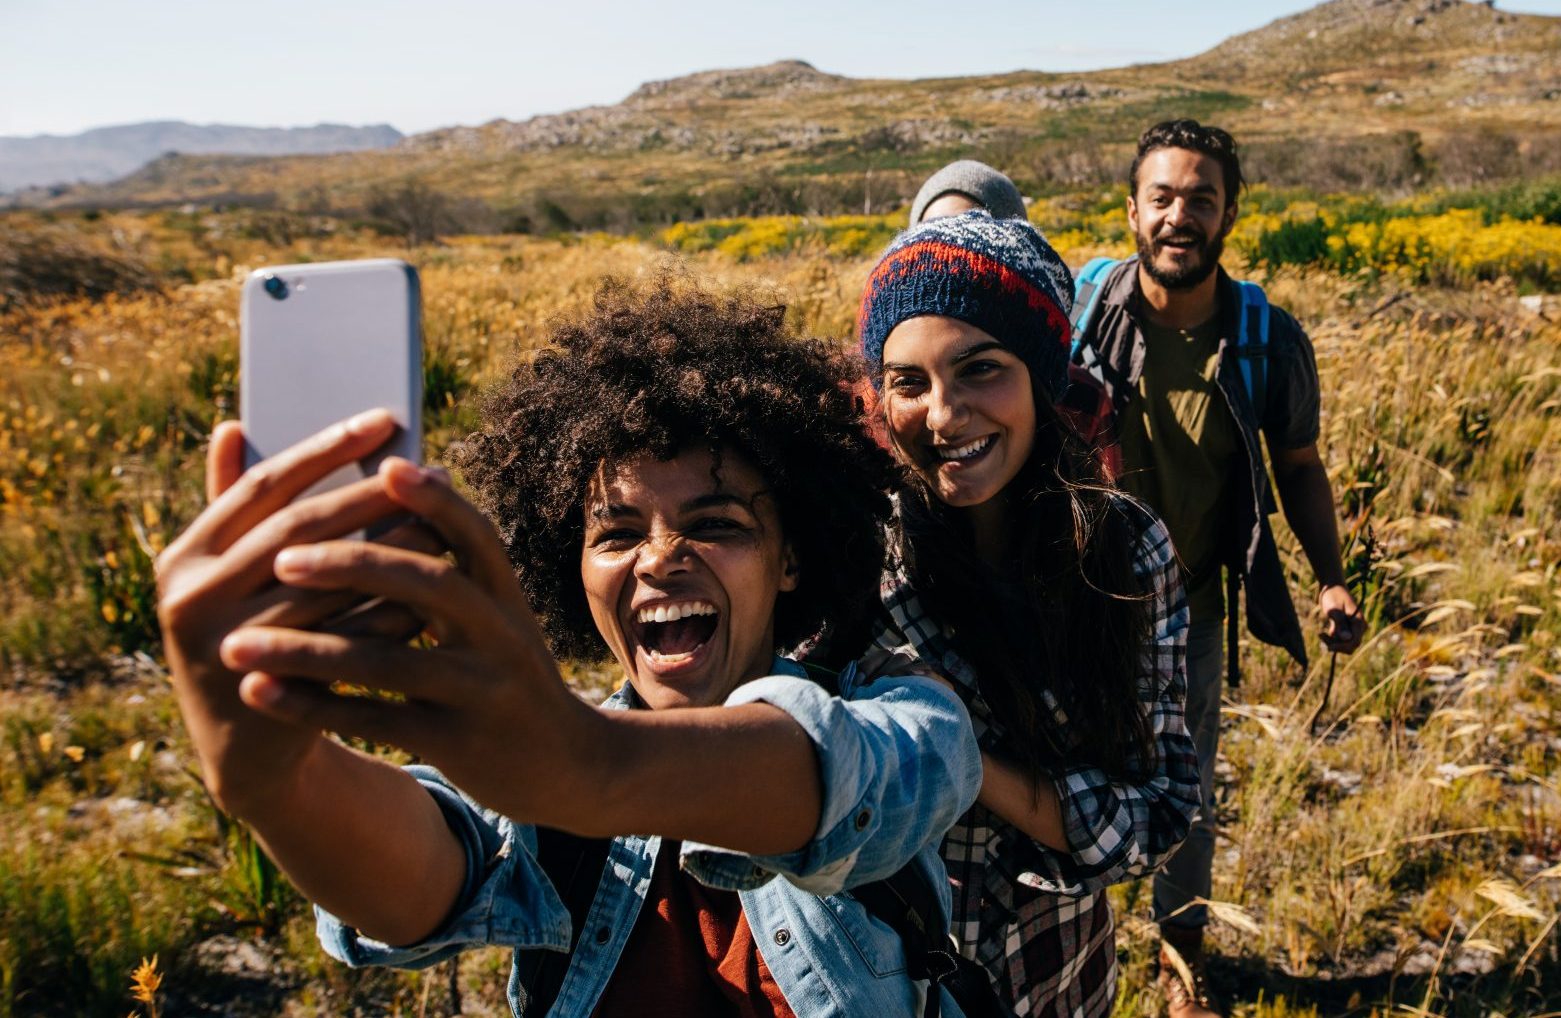 Friends hiking in the countryside and taking a selfie